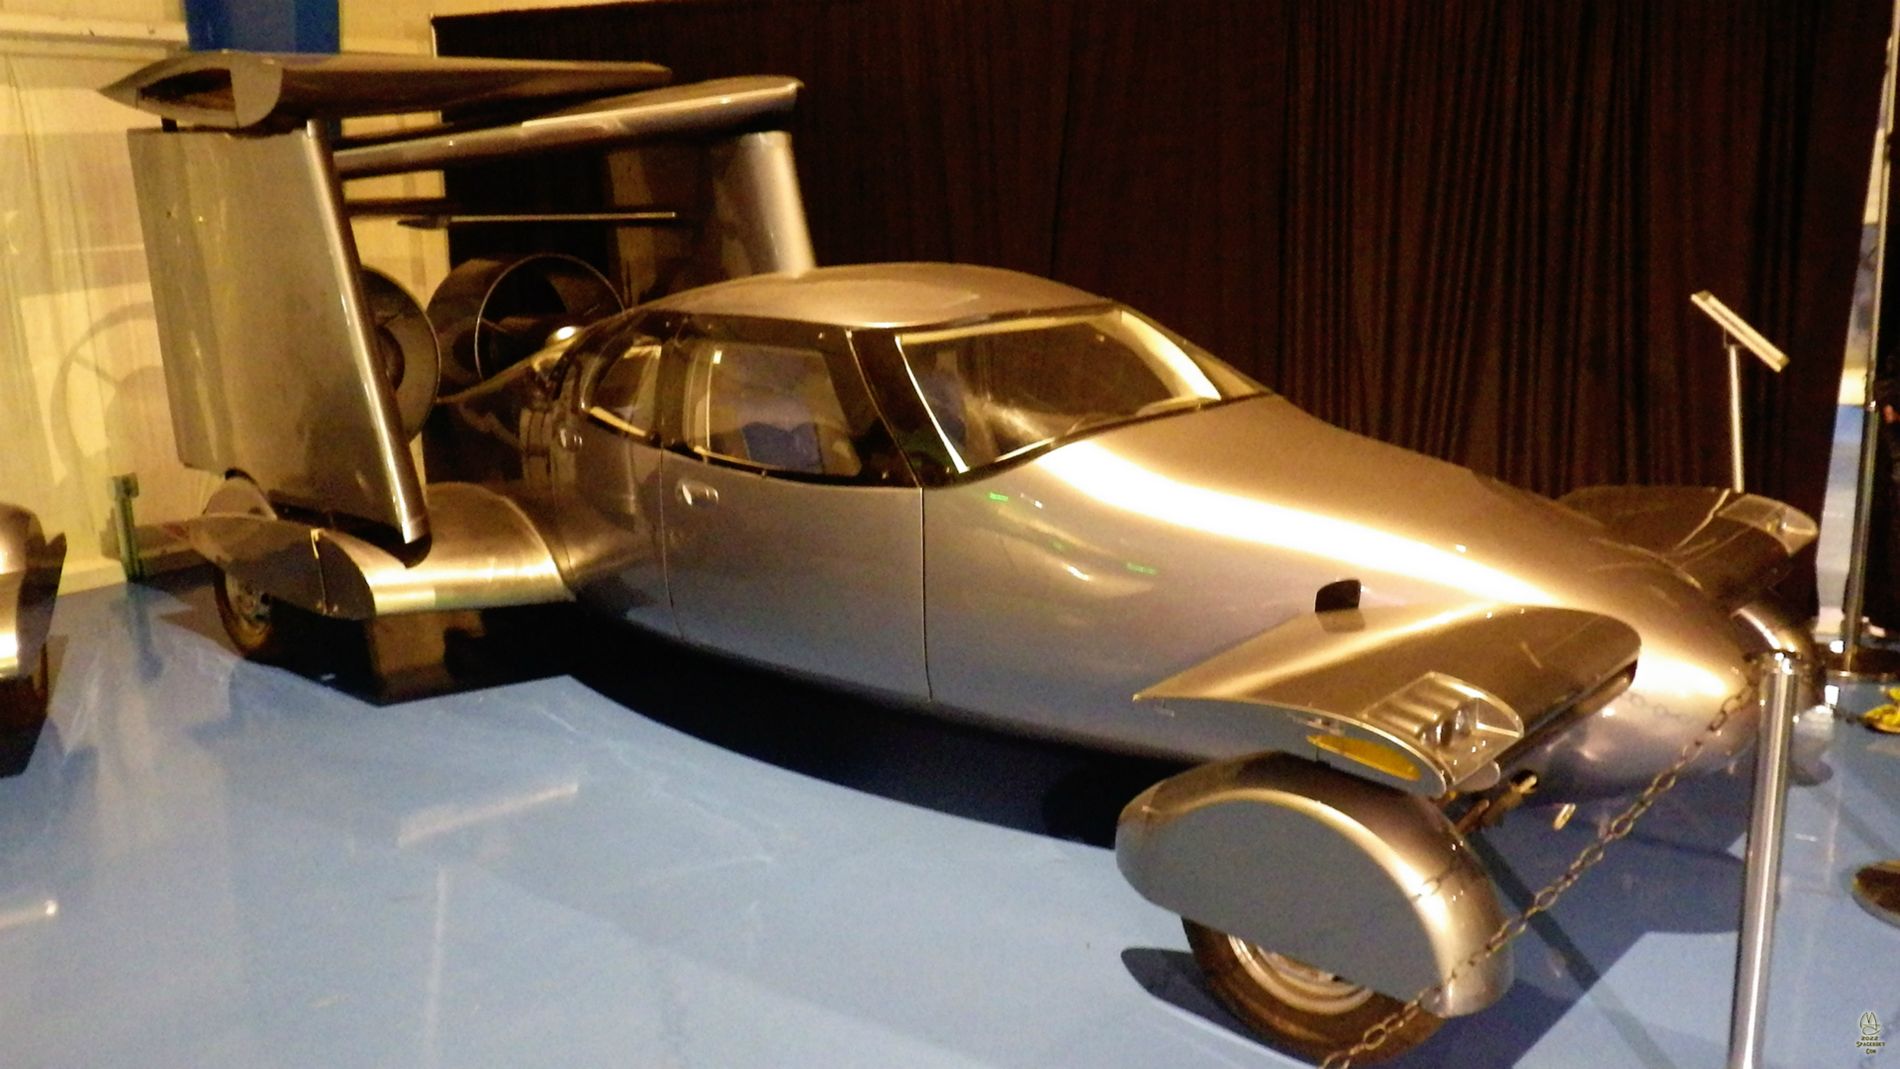 Flying cars, as promised.